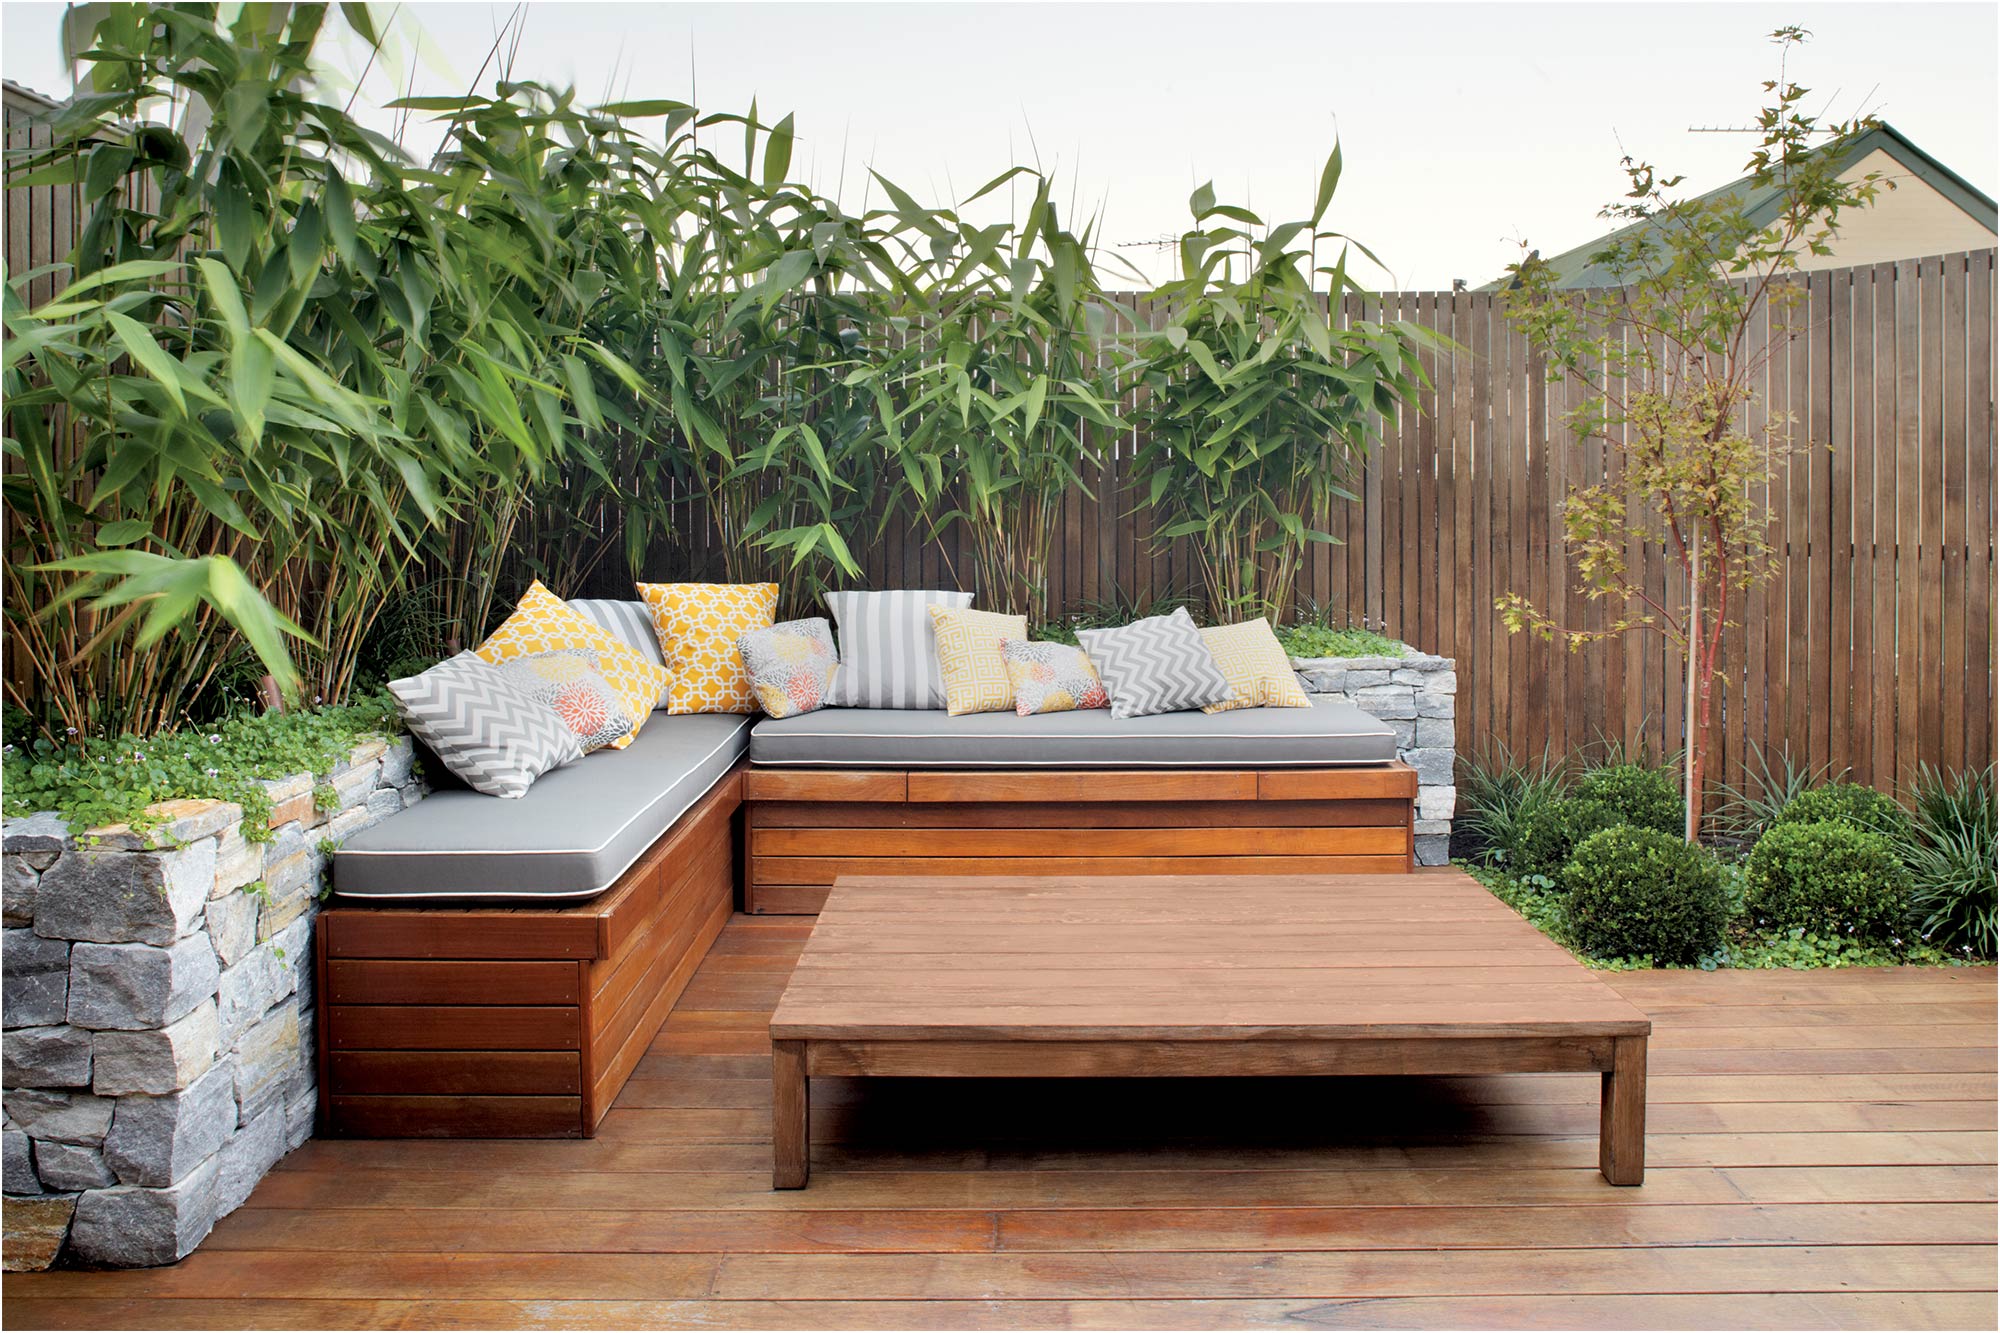 Rozelle Courtyard Landscaping